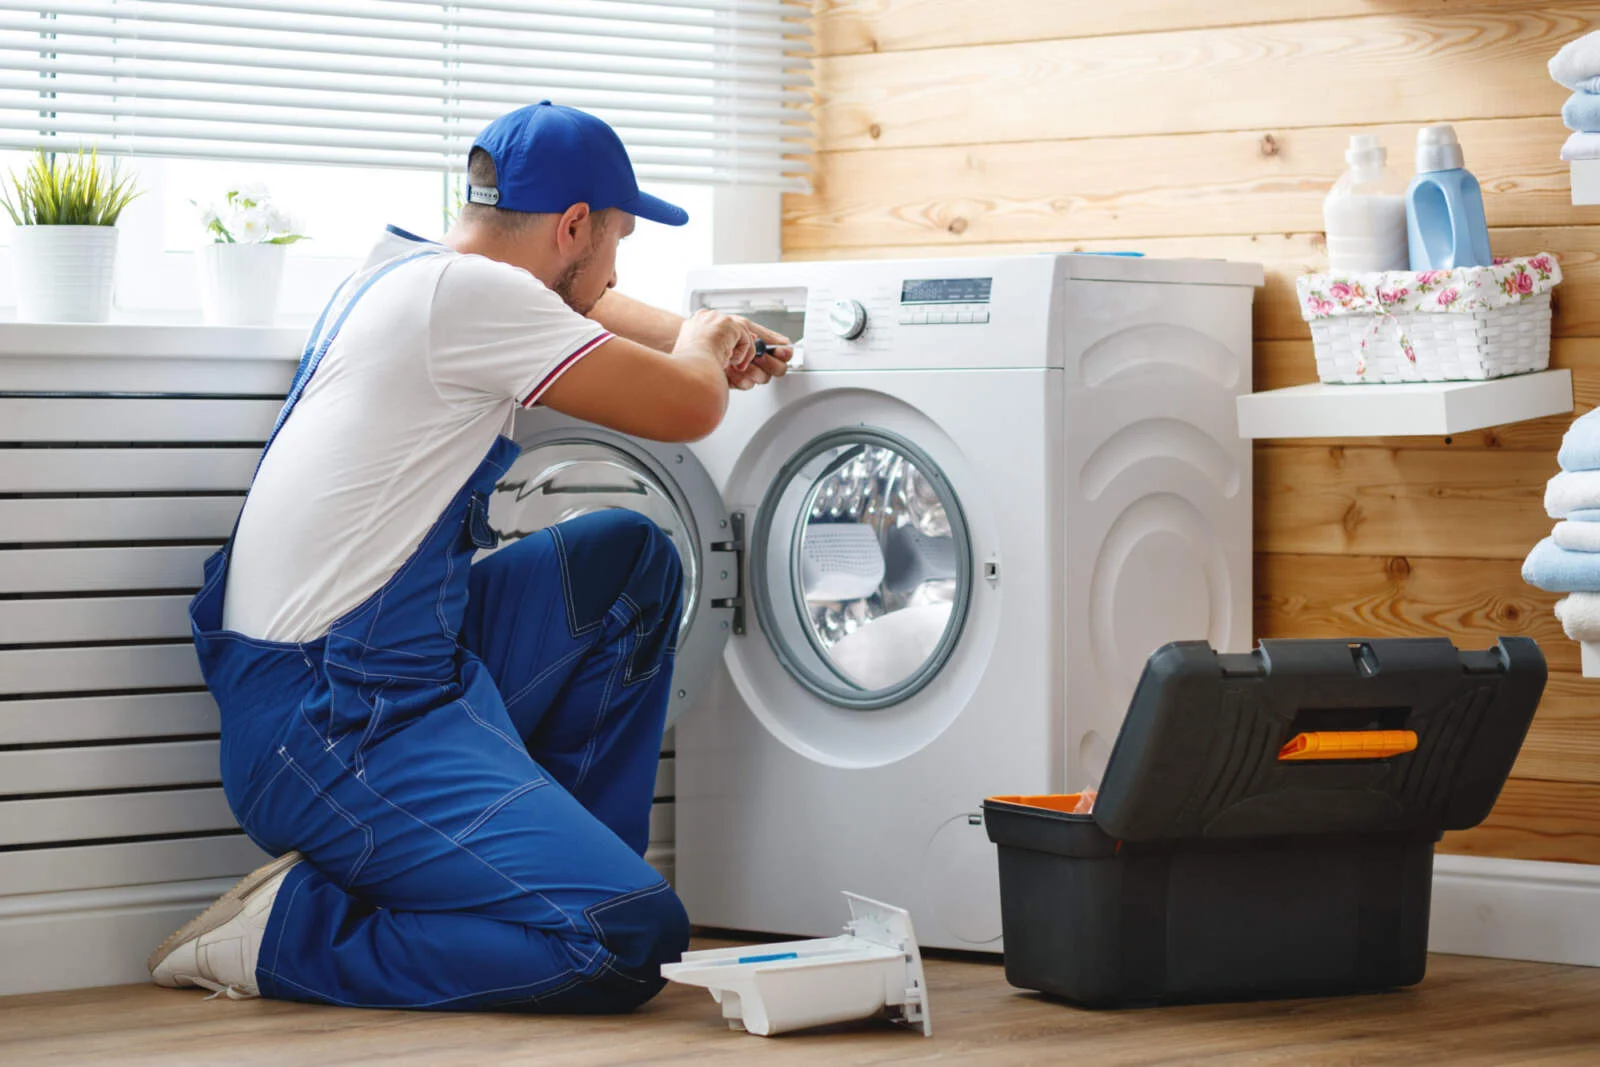 Appliance Repair Stockport - Same Day or Next Day Repairs